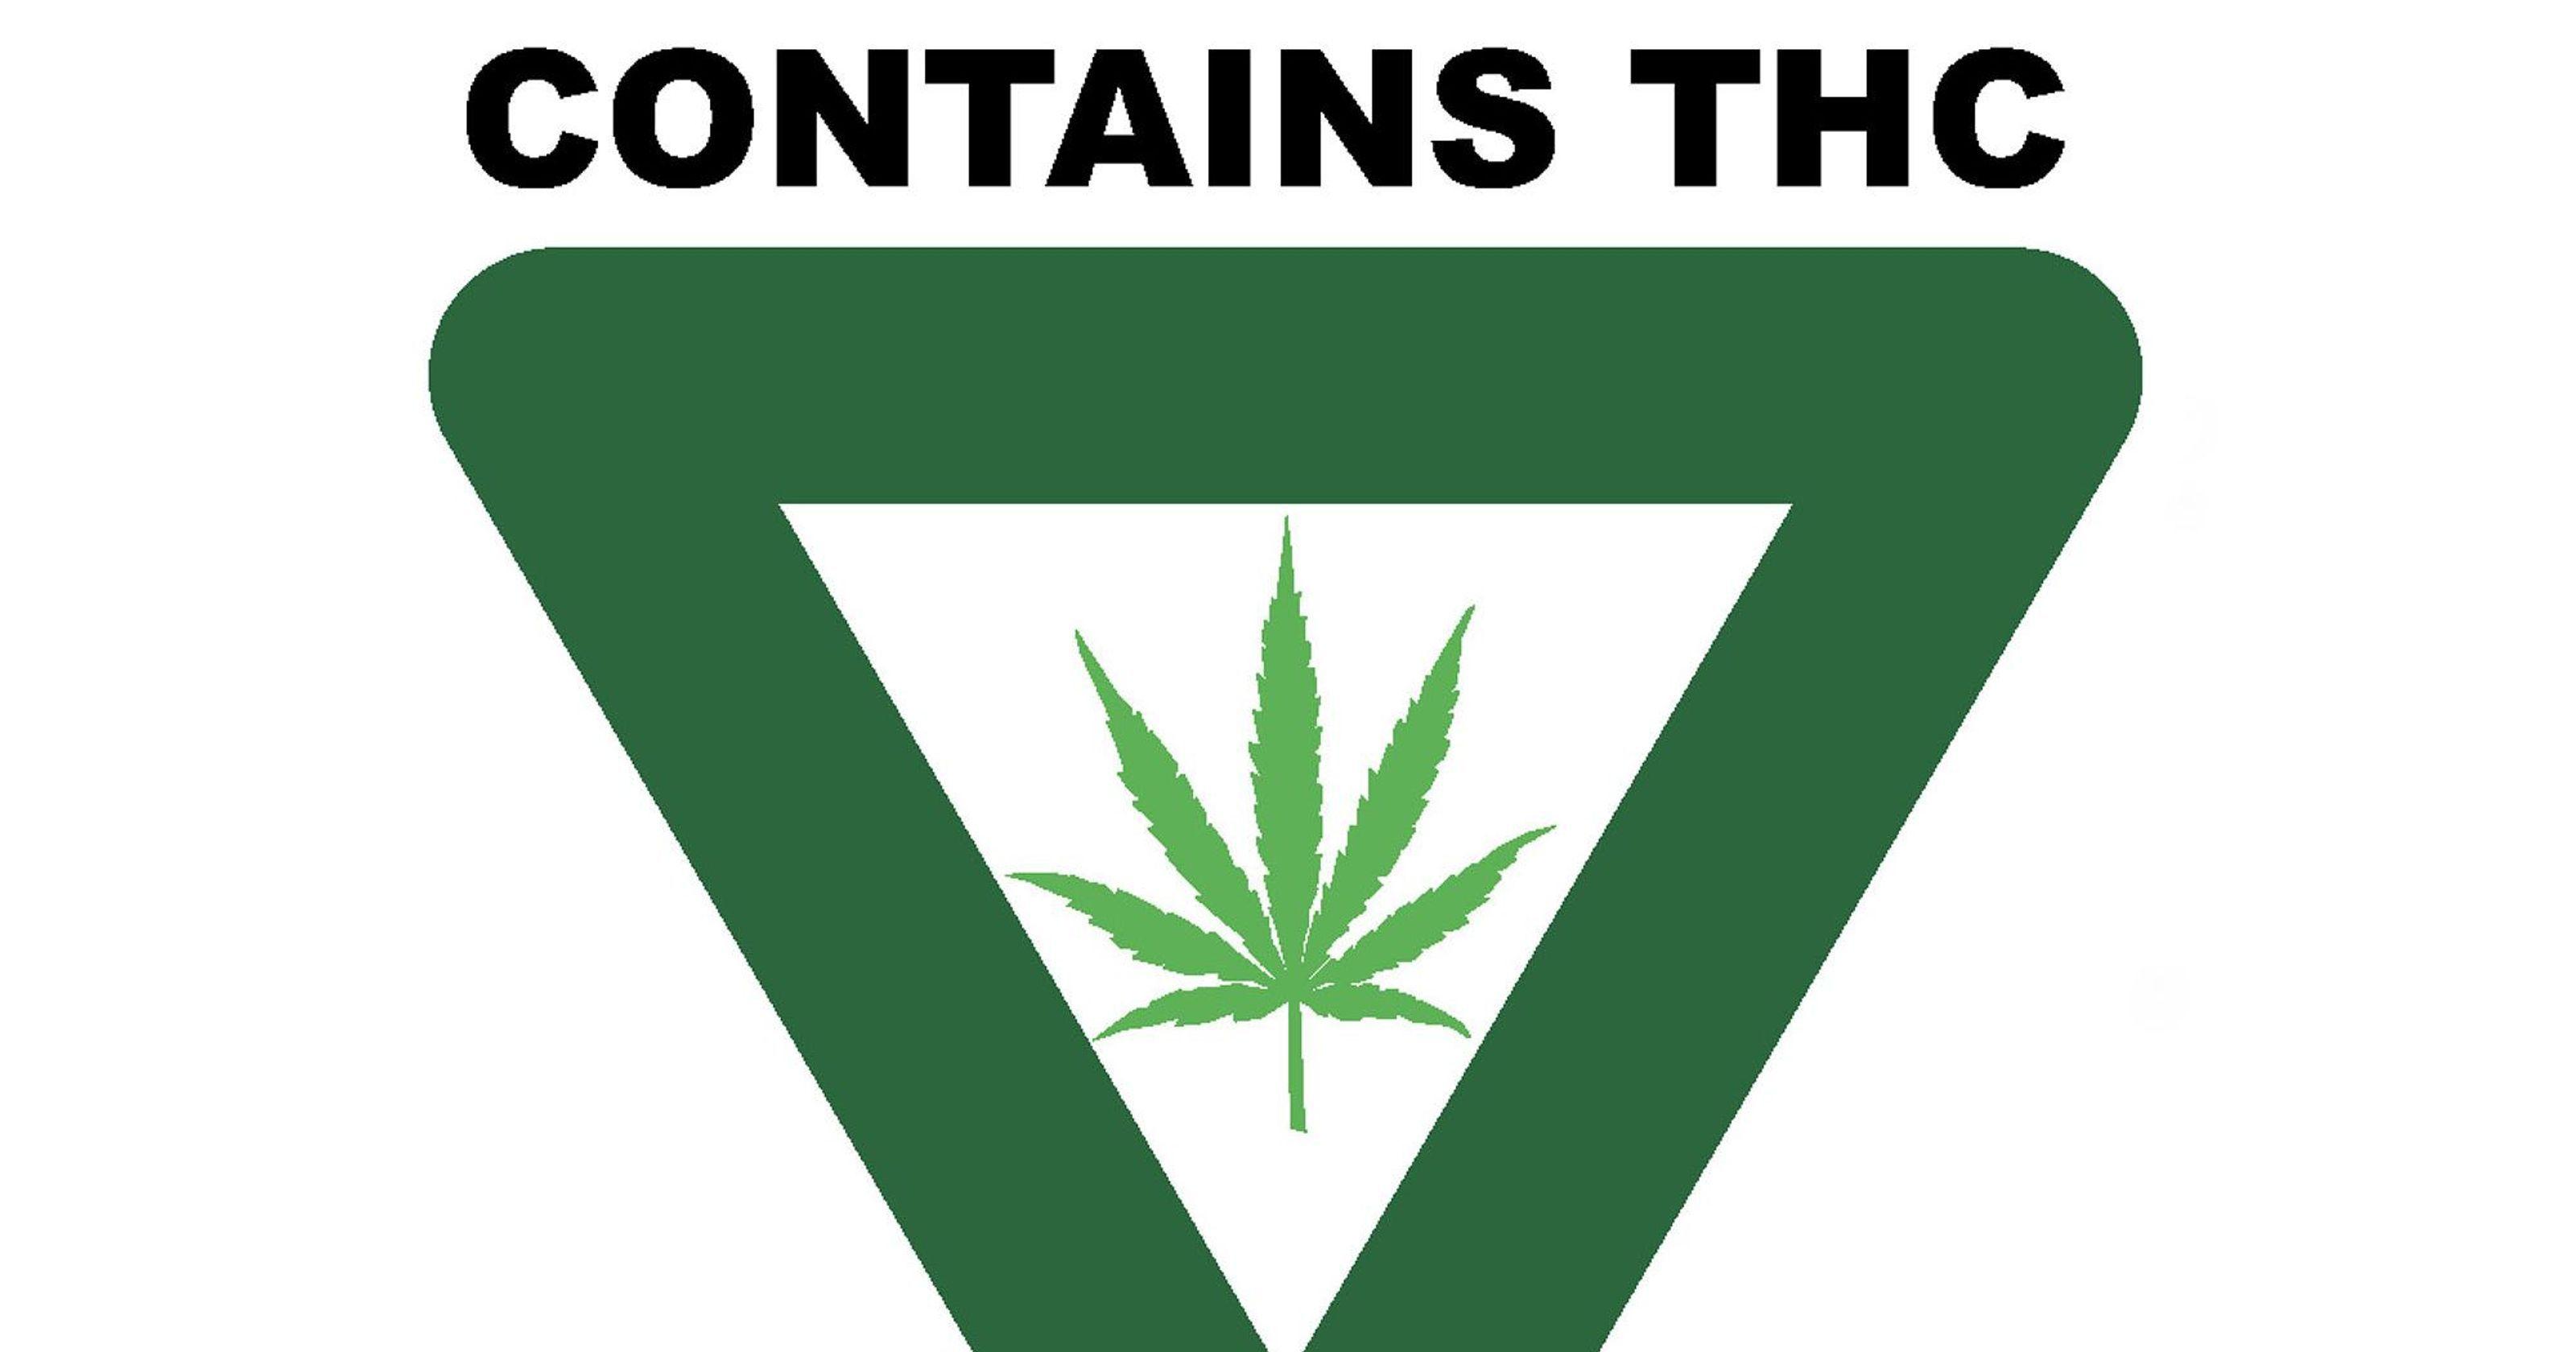 Triangle with Leaf Logo - Upside down, green triangle and cannabis leaf becomes pot symbol